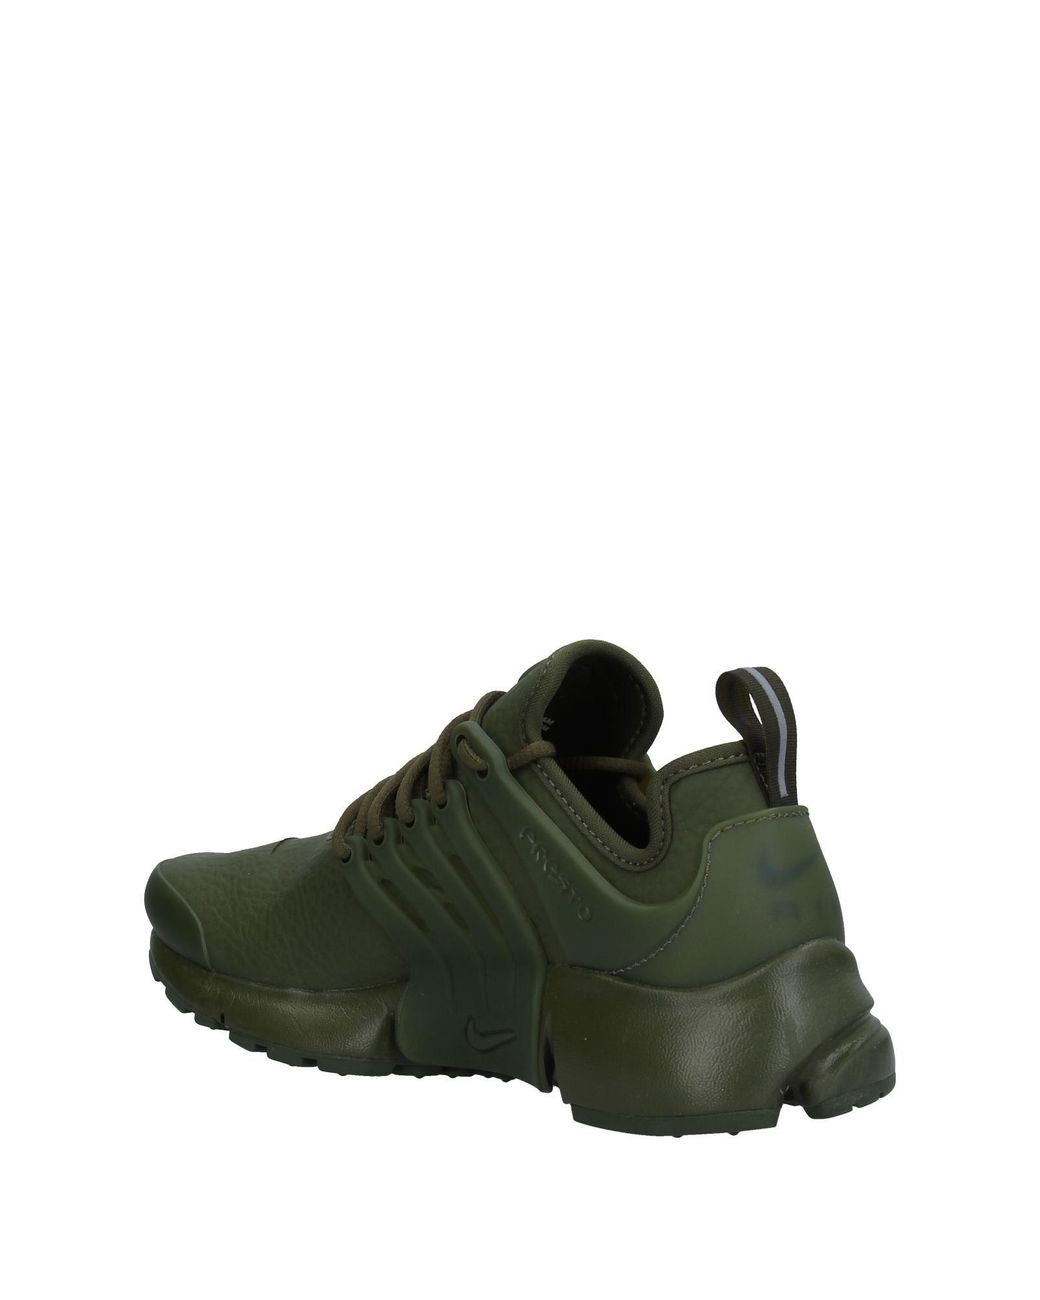 Nike Low-tops & Sneakers in Military Green (Green) | Lyst